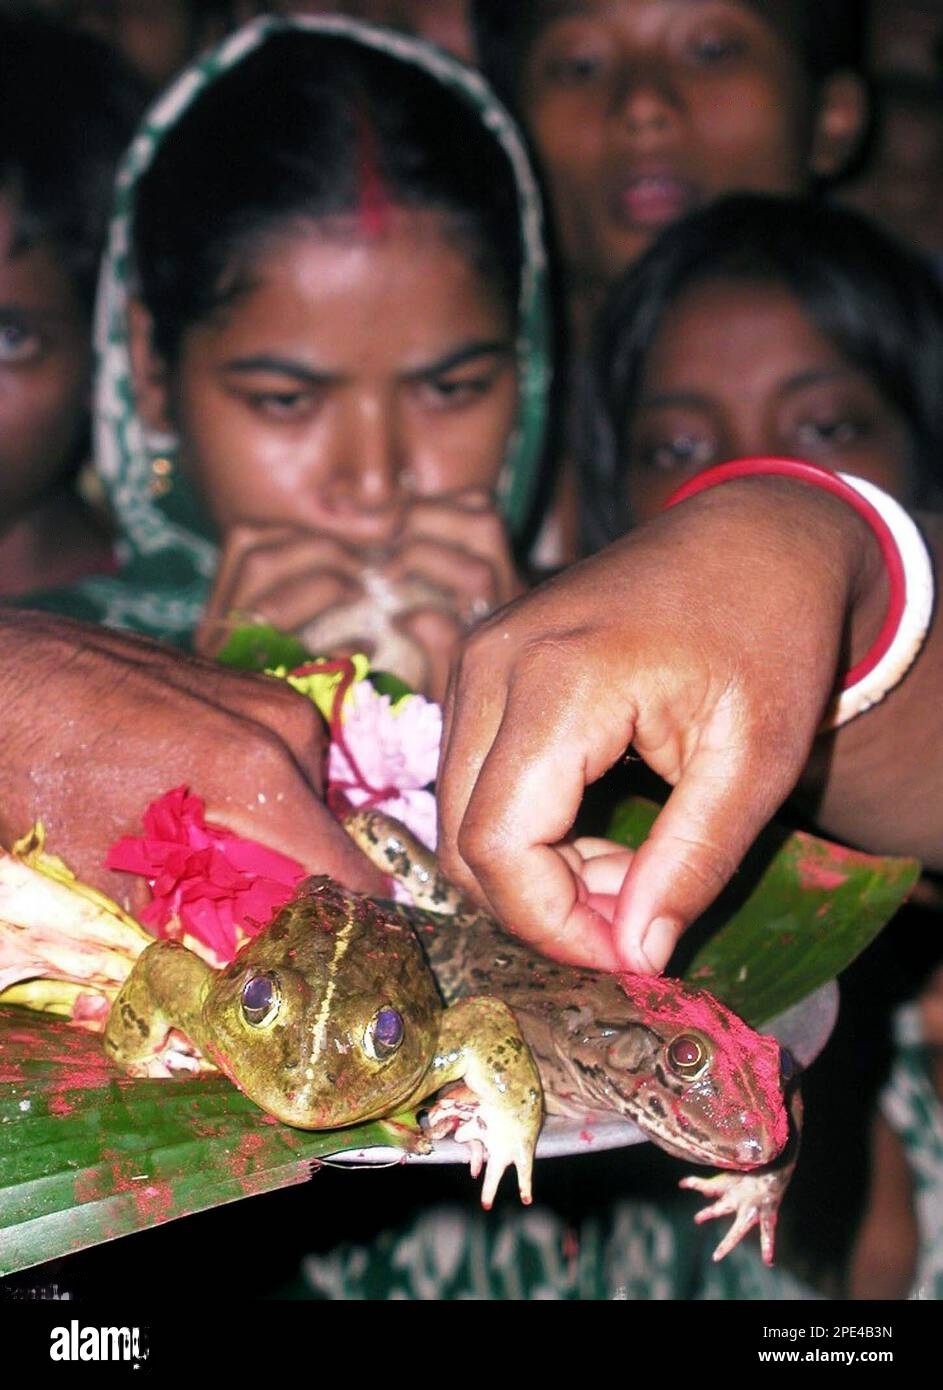 a-woman-puts-vermilion-on-a-female-frog-sitting-beside-a-male-frog-during-a-marriage-ceremony-of-frogs-at-khochakandar-village-in-the-eastern-indian-state-of-west-bengal-sunday-june-5-2005-according-to-indian-mythology-the-ma